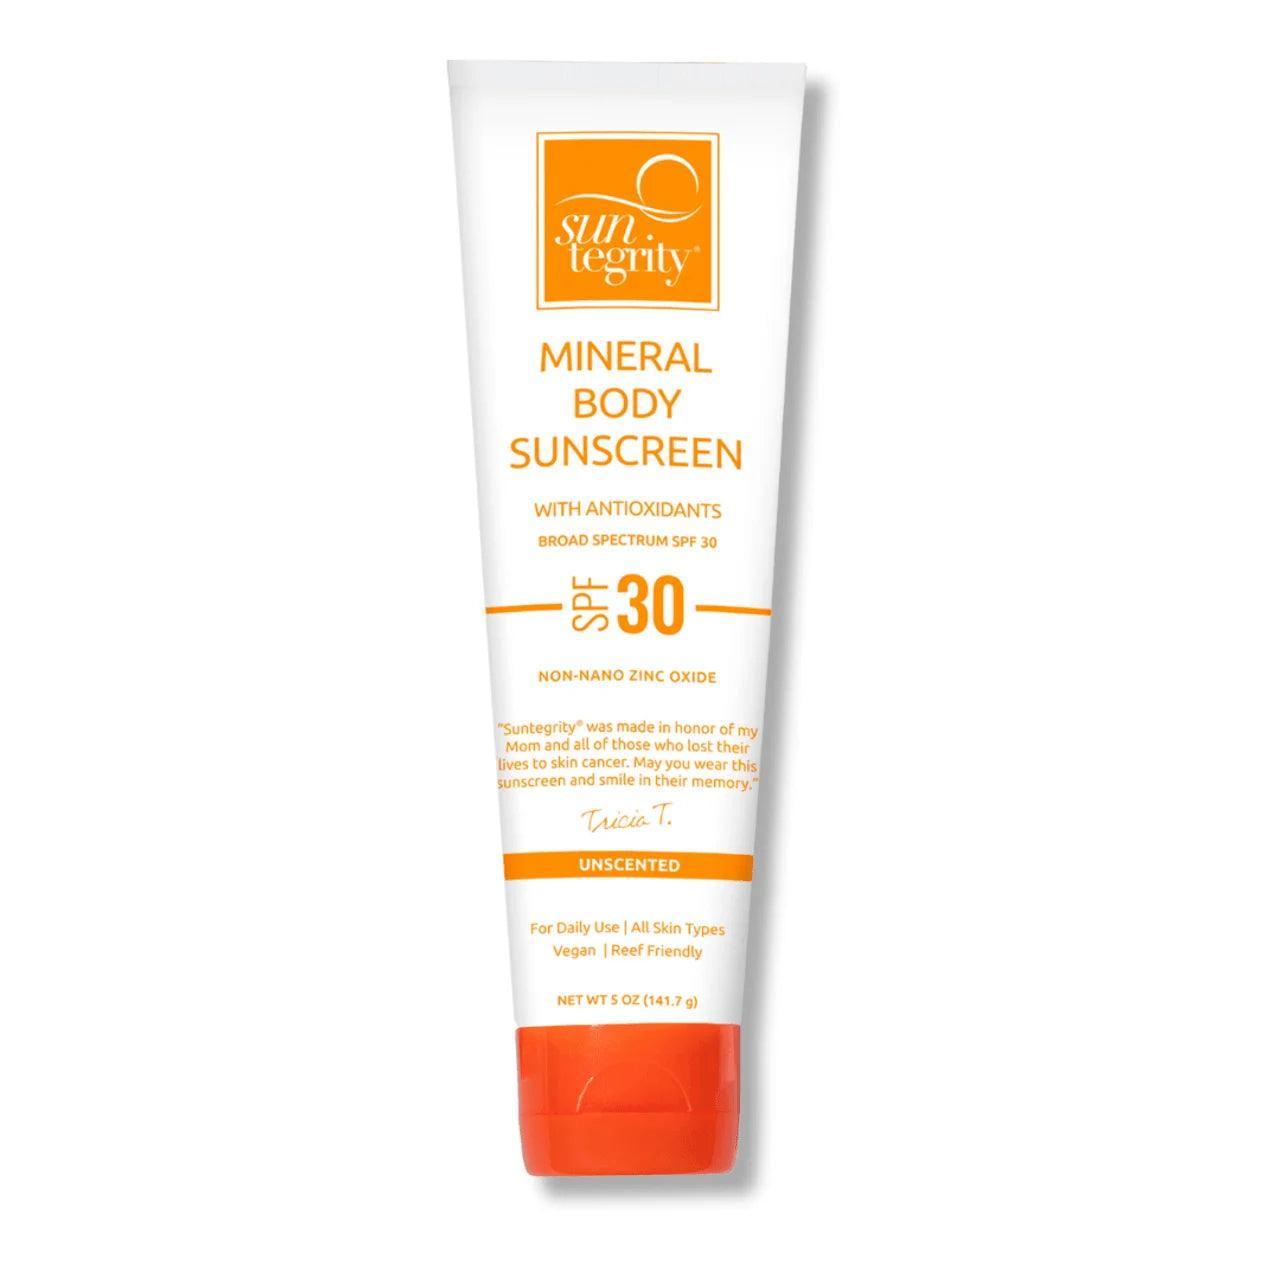 Suntegrity Unscented Mineral Body Sunscreen, Broad Spectrum SPF 30 85g by Love Nature